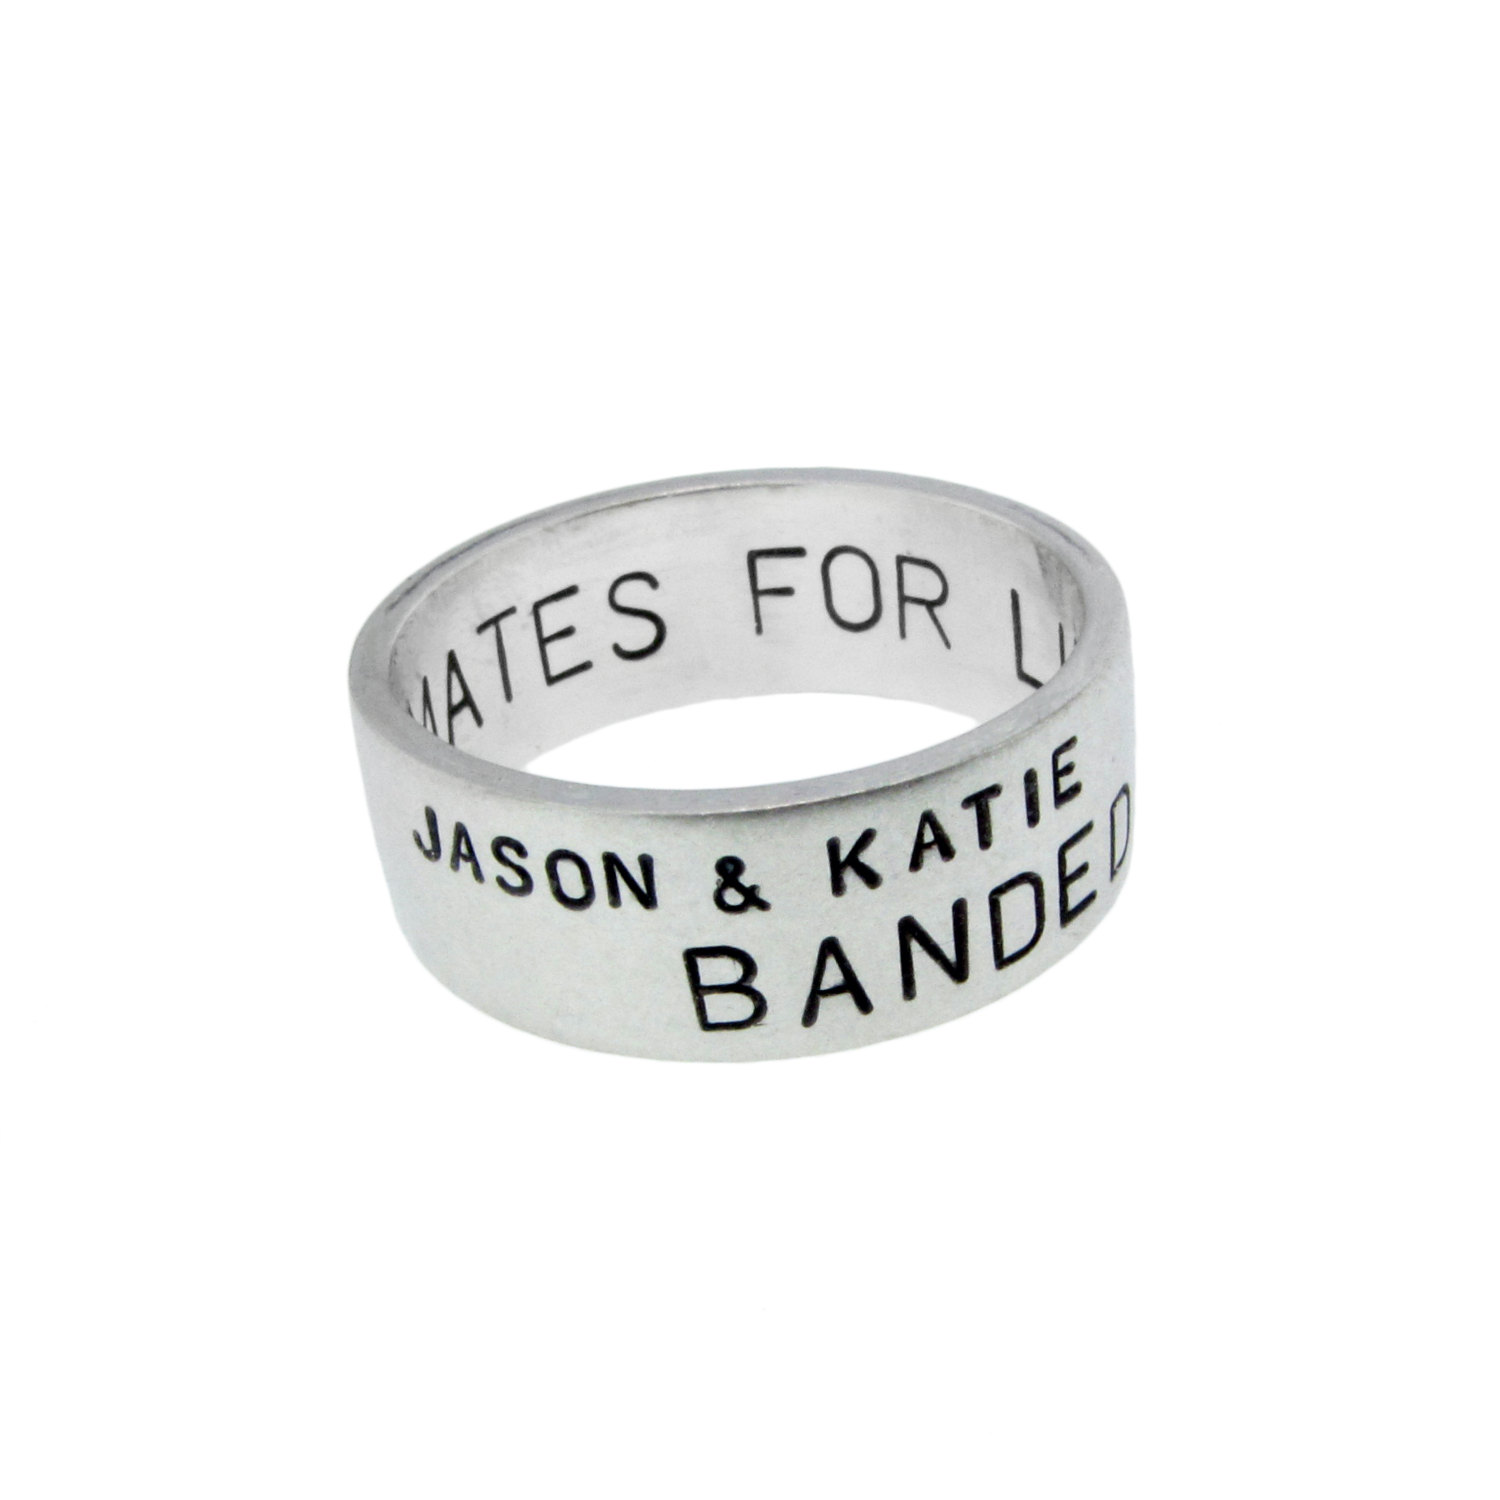 Mens Silver Wedding Band With Hand Stamped Names Date Vows Engraved